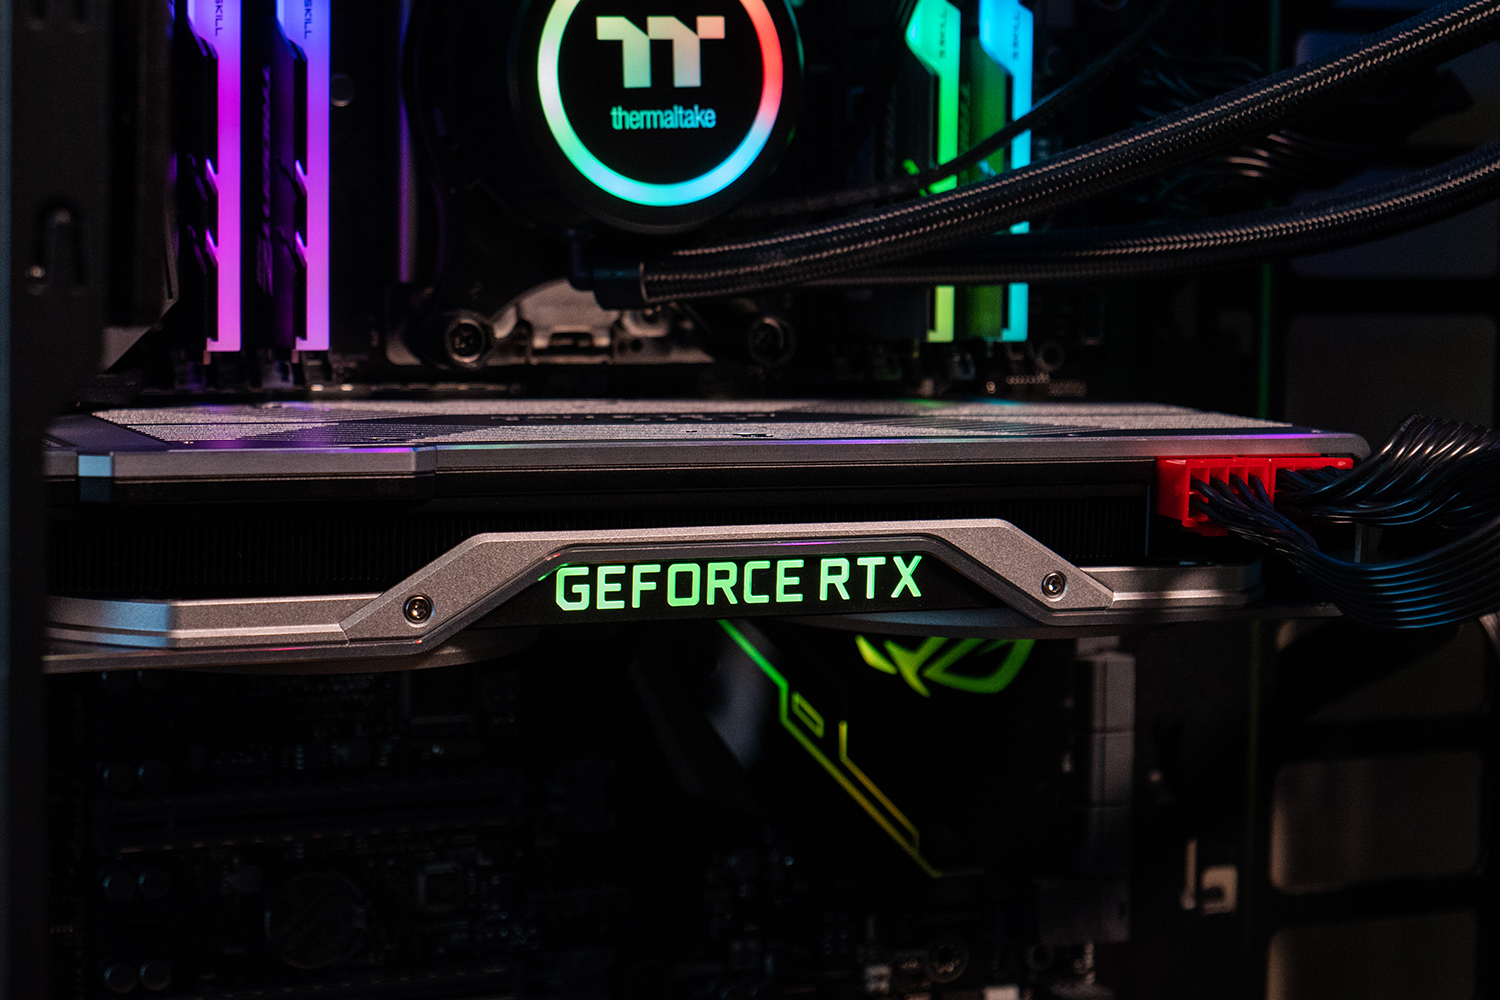 Nvidia RTX 2080 2080 Ti: Tested and Benchmarked | Digital